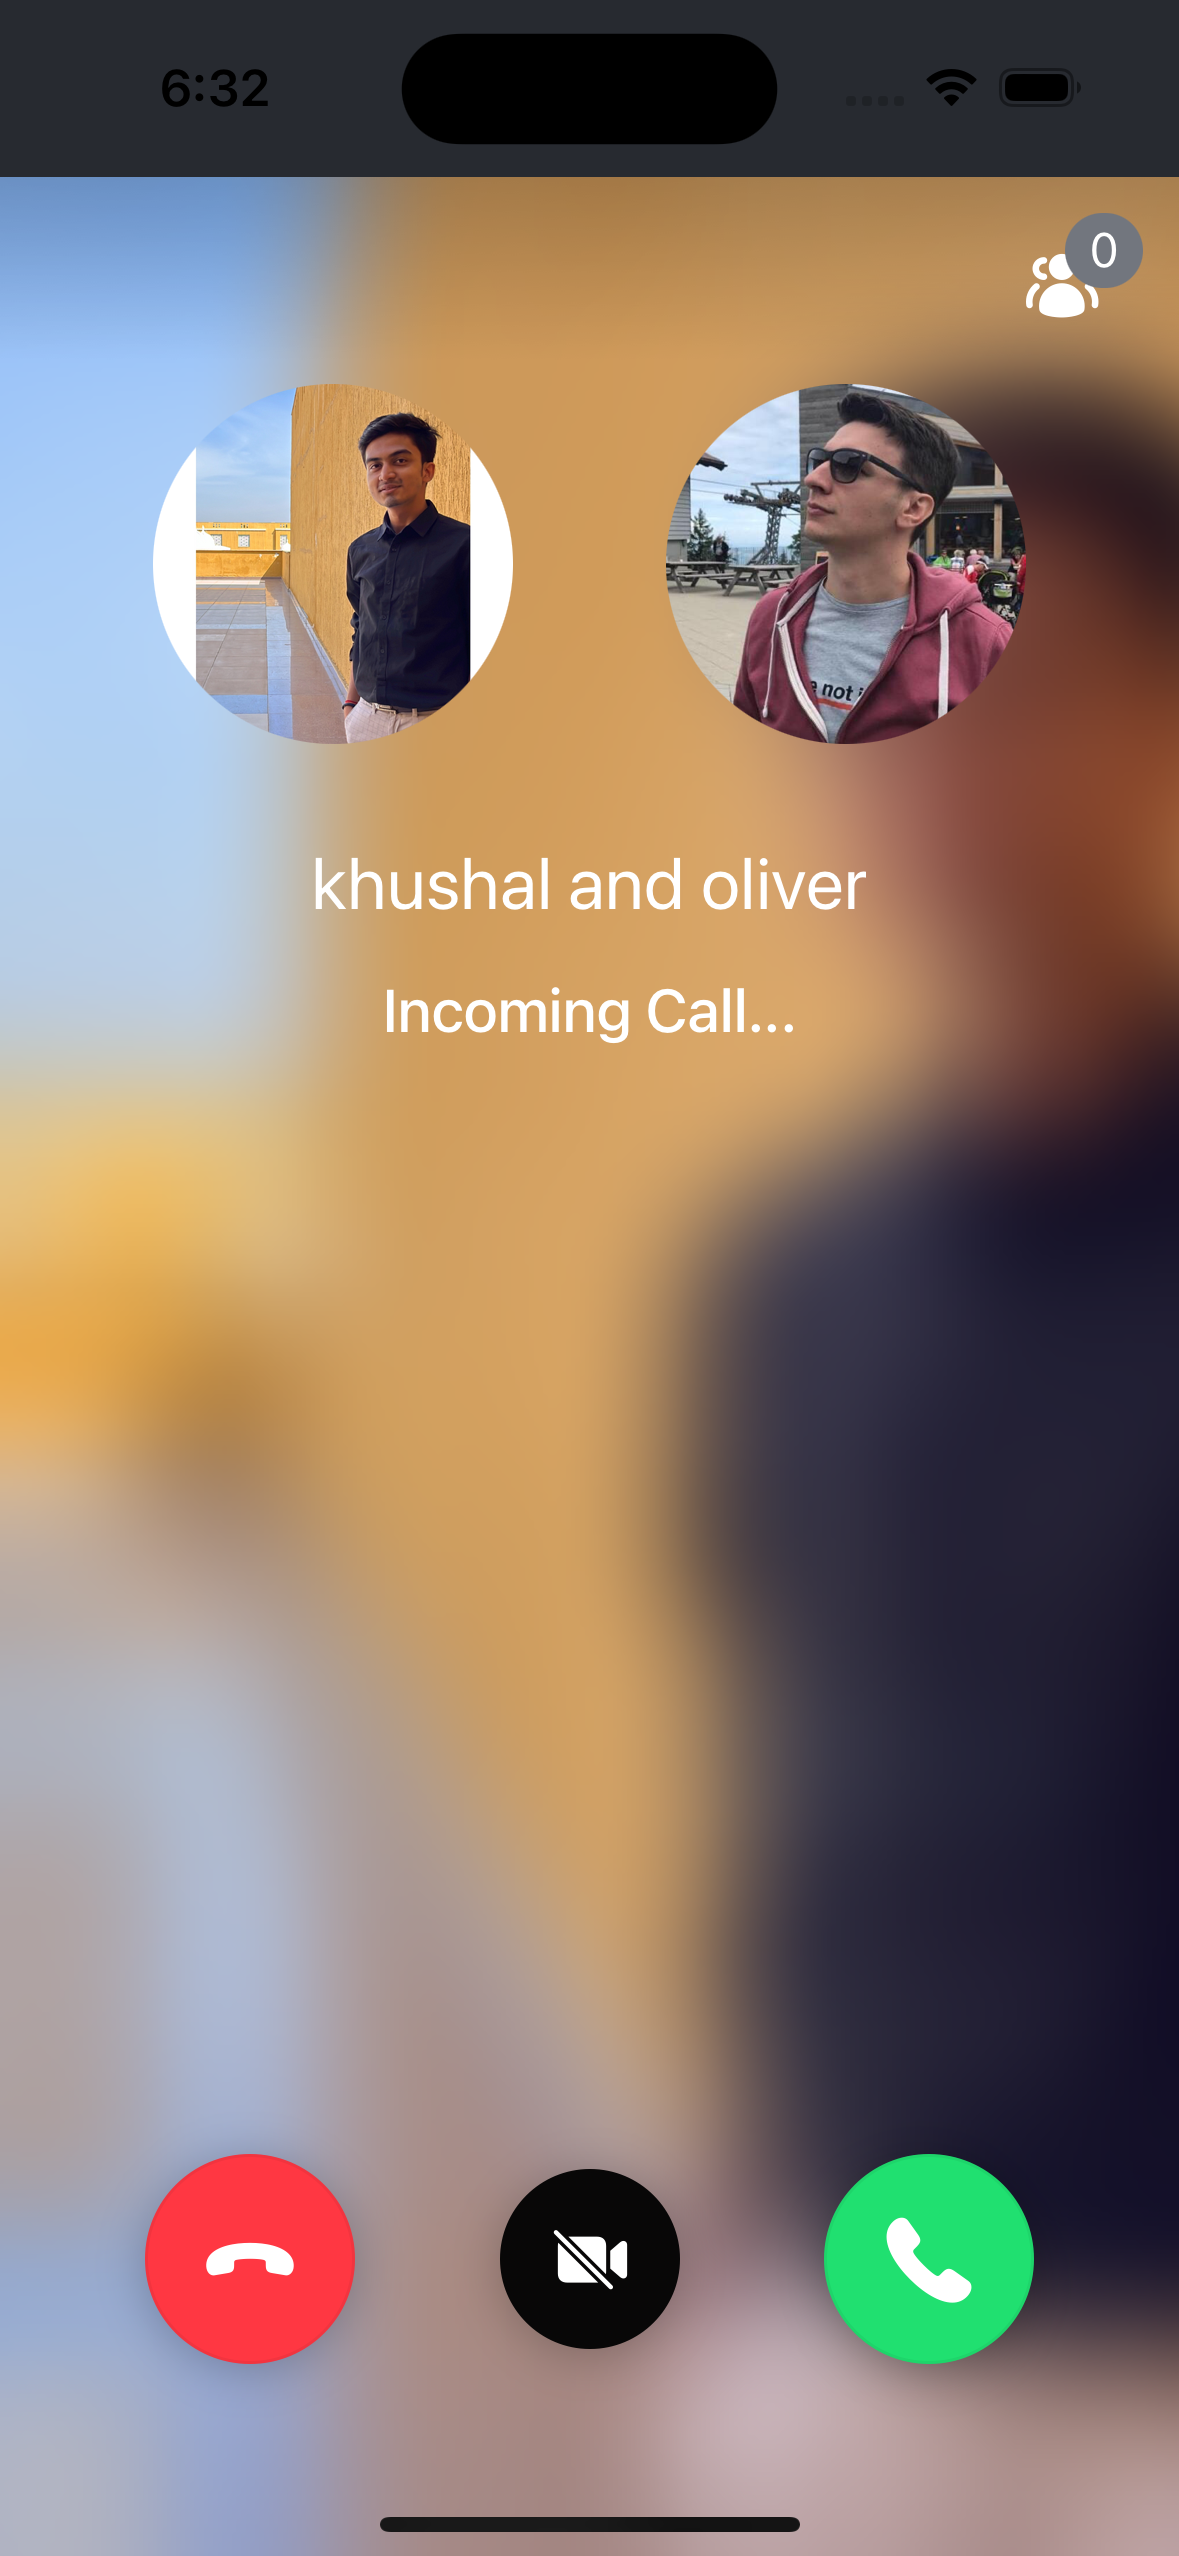 Preview of the IncomingCall component.